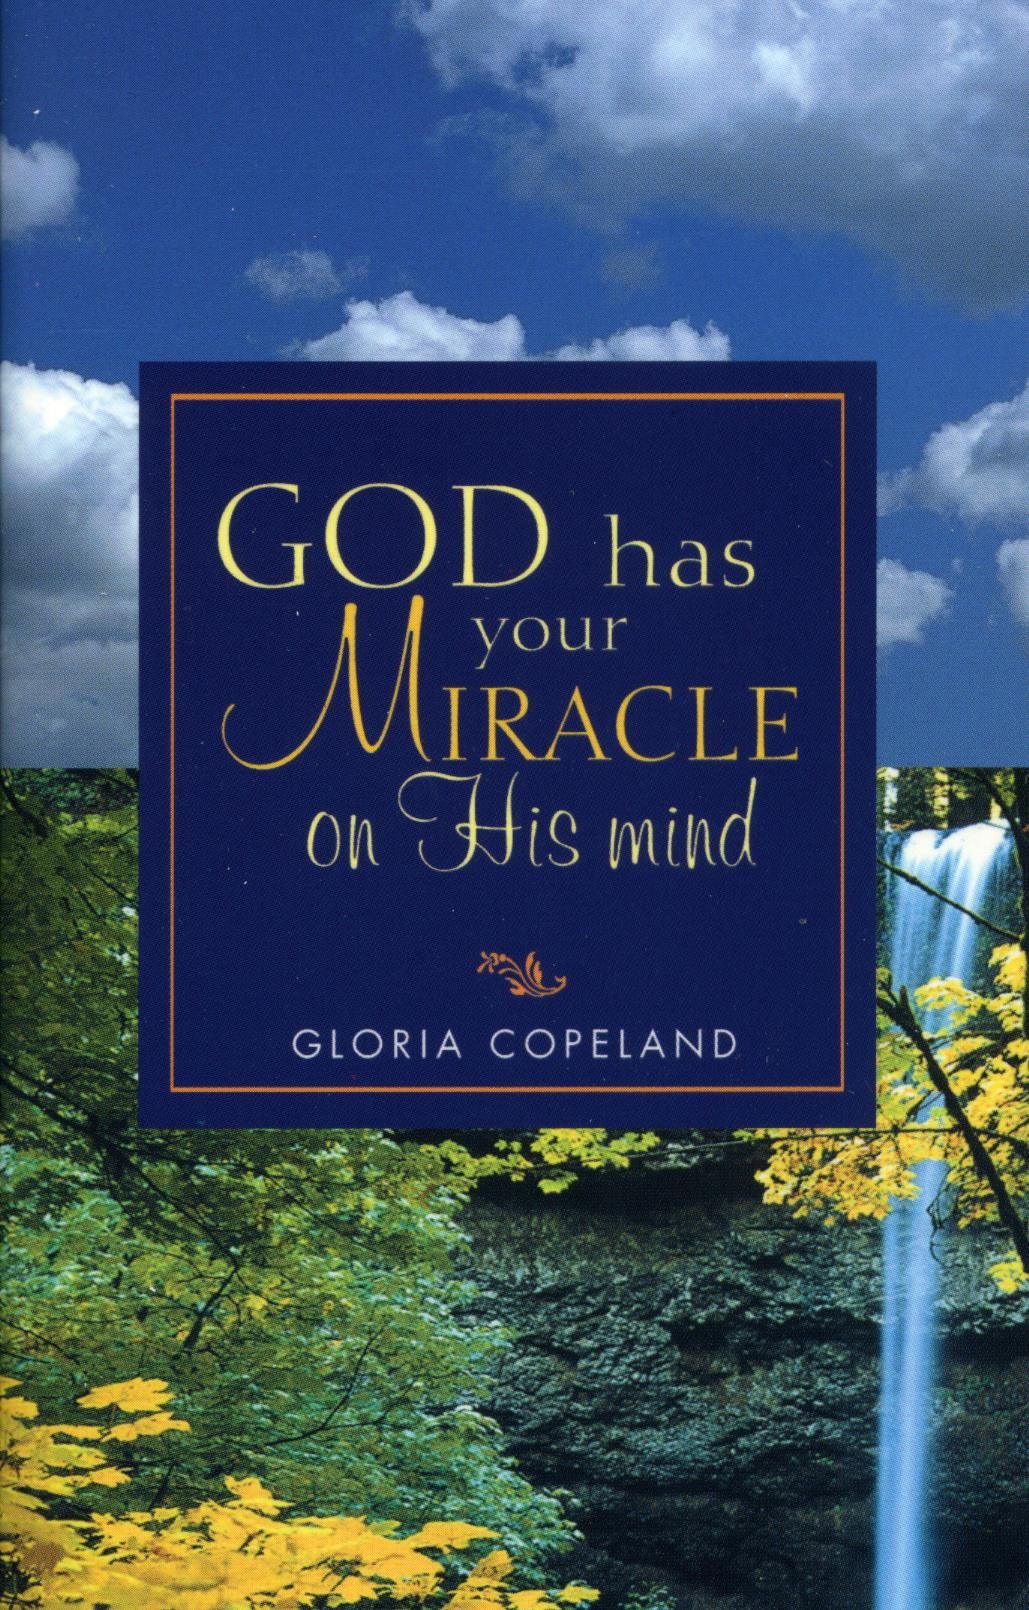 Englische Bücher - G. Copeland: God has your Miracle on His Mind